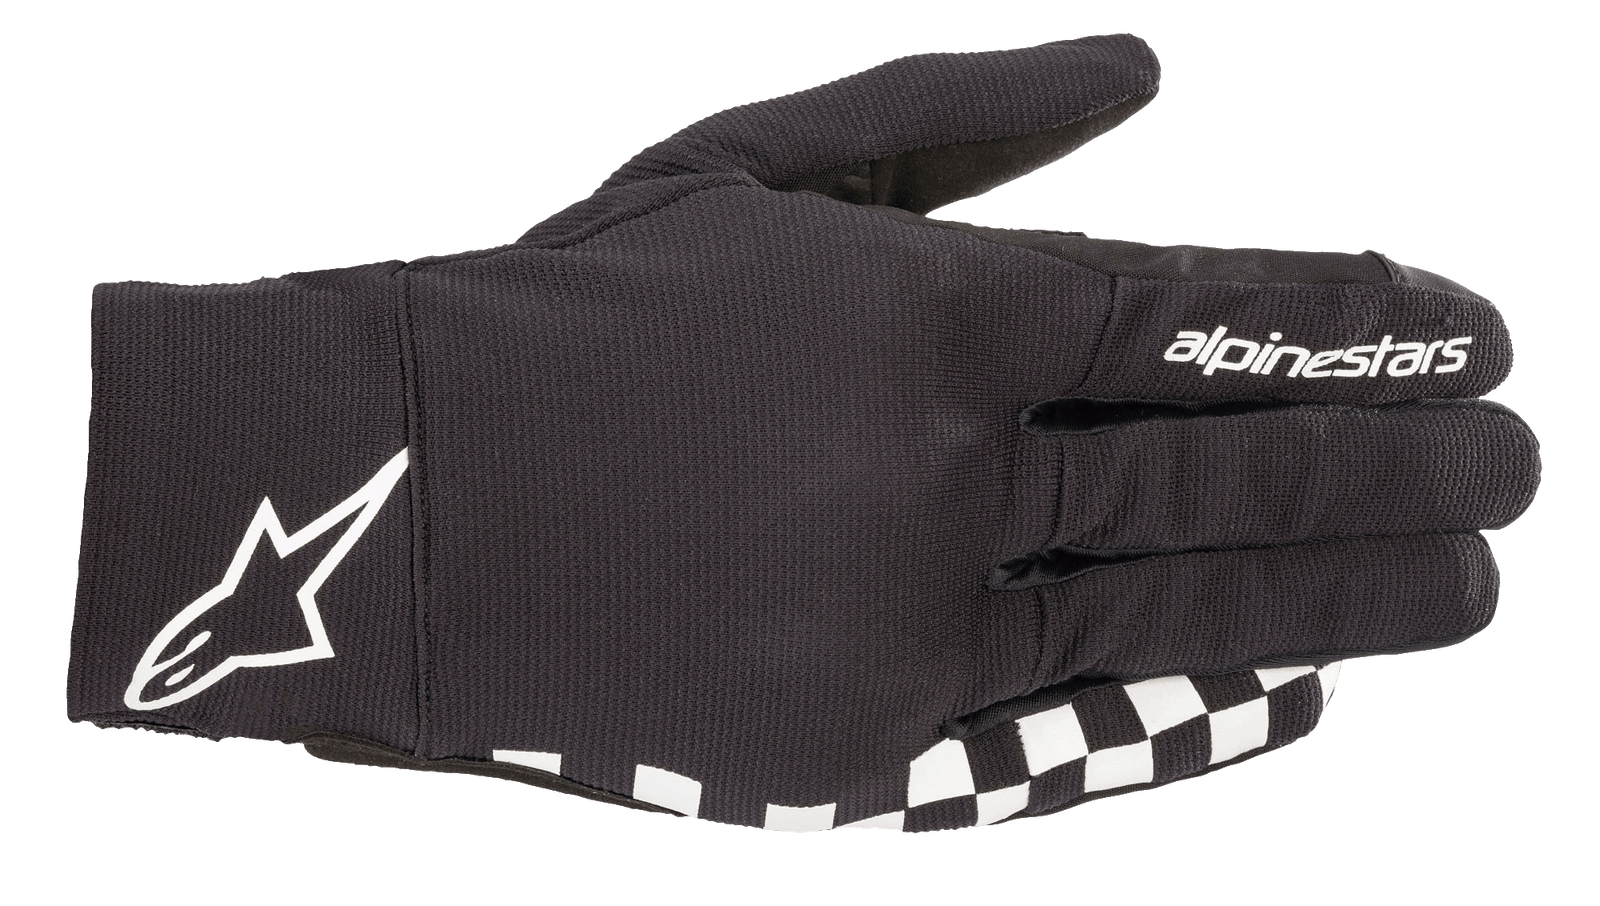 The Reef Glove by Alpinestars EU is a right black glove featuring "alpinestars" branding on the top, with a white logo near the wrist and a black-and-white checkered pattern along the lower edge. Made from stretch fabric, it boasts a synthetic suede palm and is touchscreen compatible, making it ideal for motorcycling or similar sports.